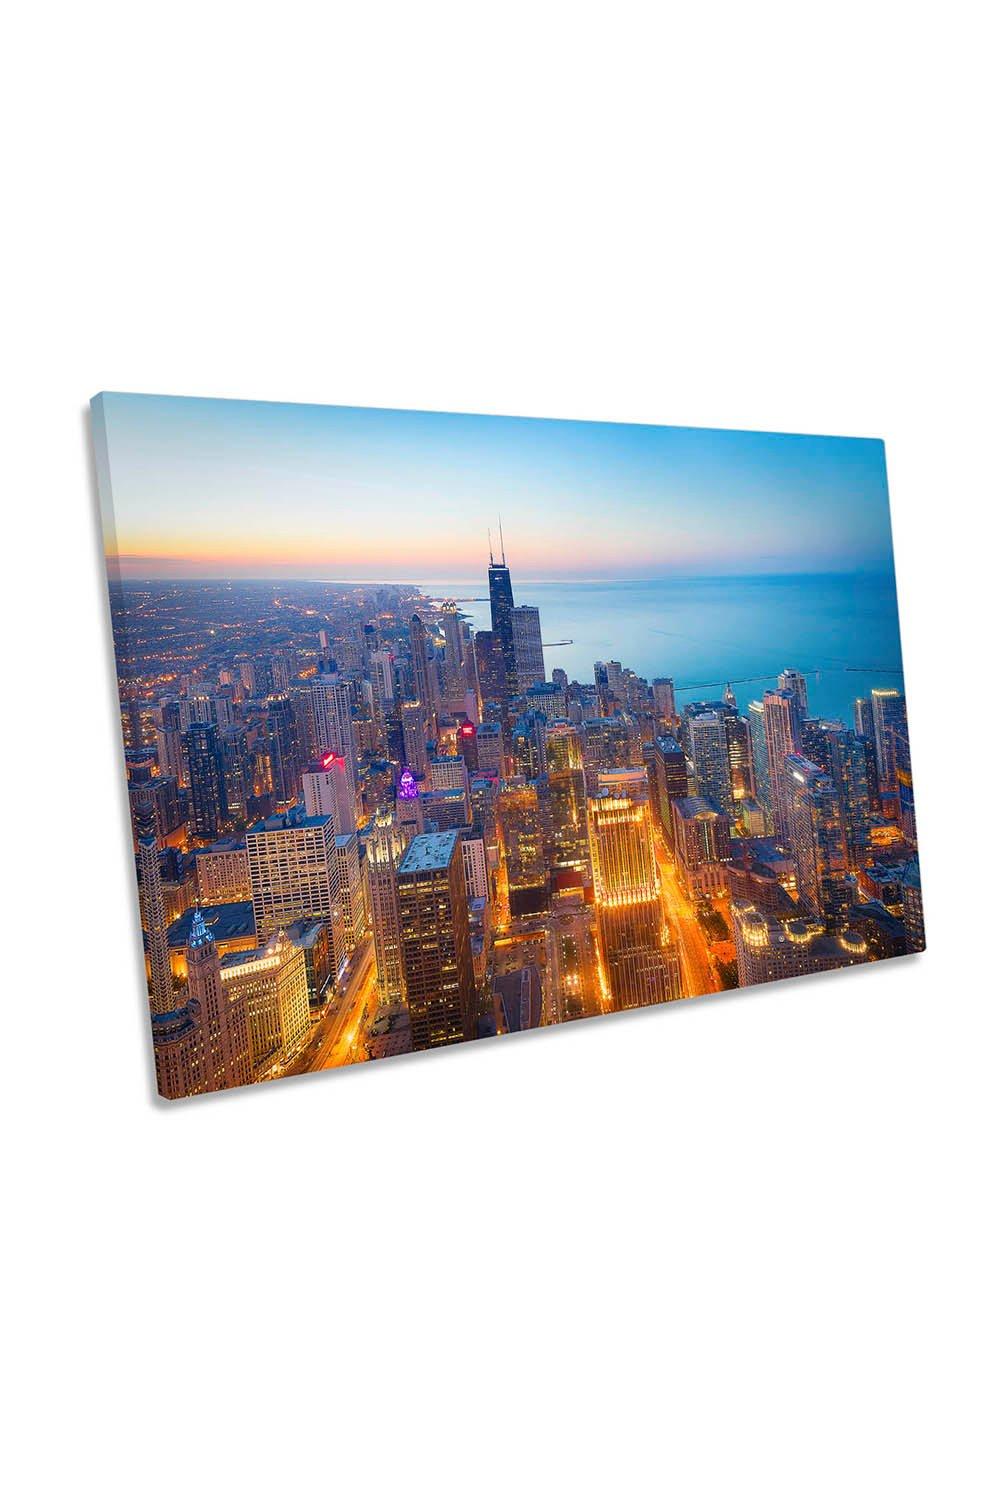 The Magnificent Mile Chicago City Skyline Canvas Wall Art Picture Print